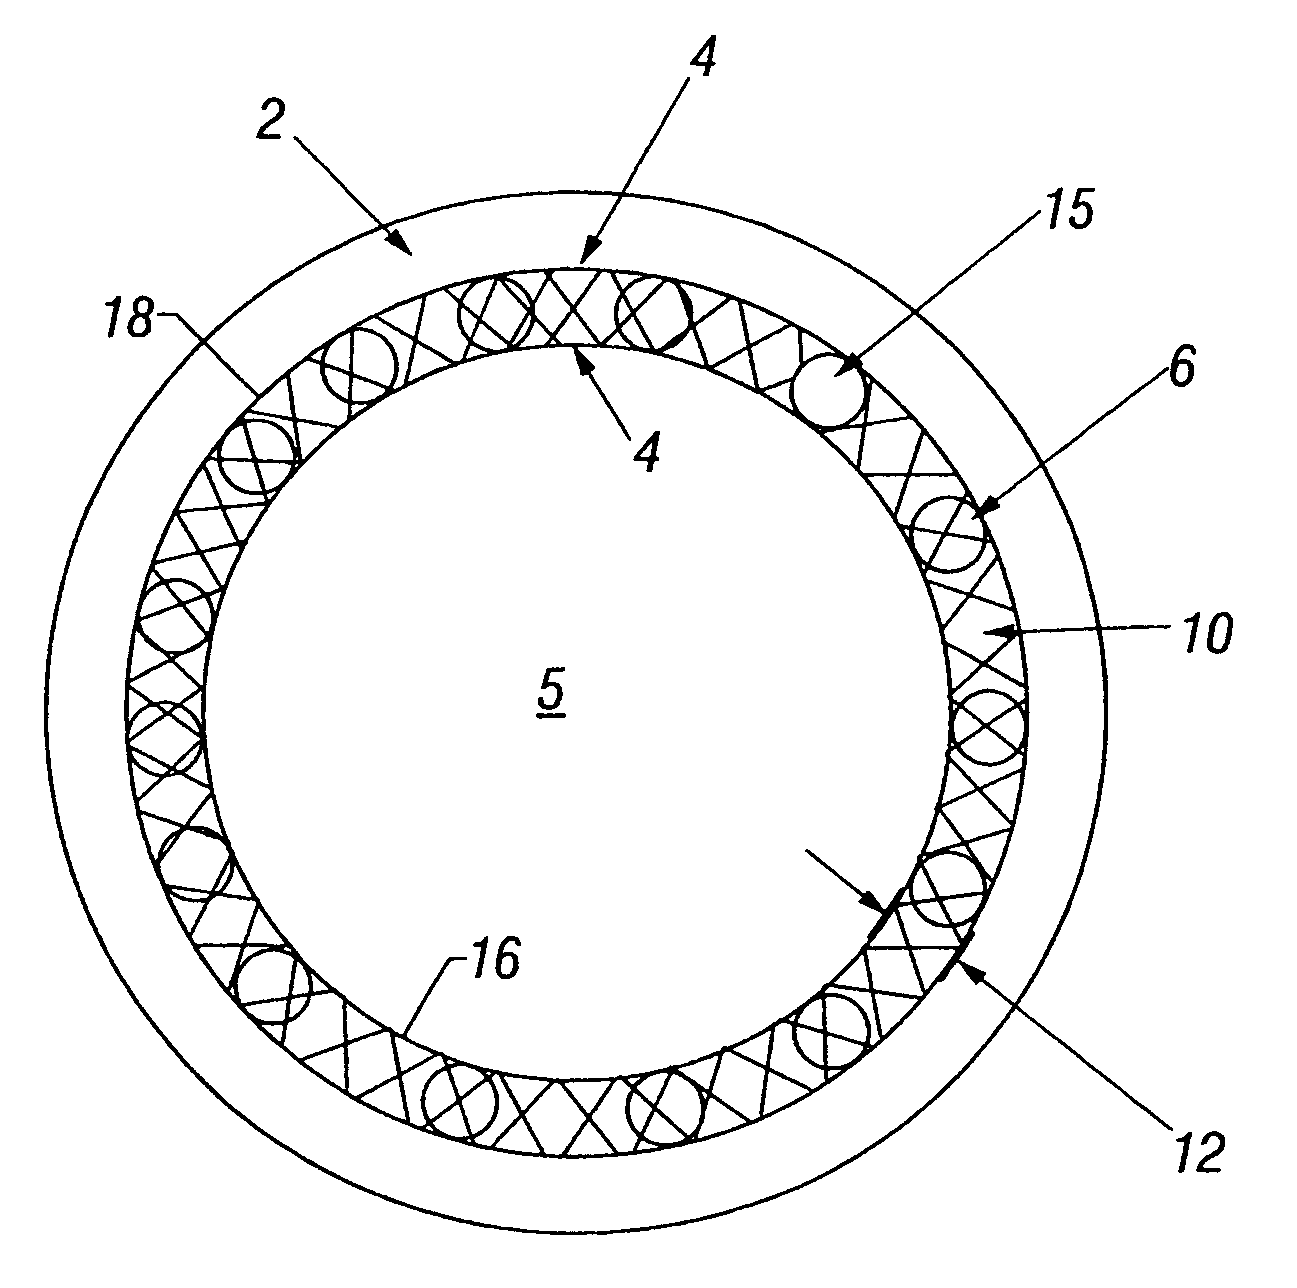 Method and apparatus for lining a conduit